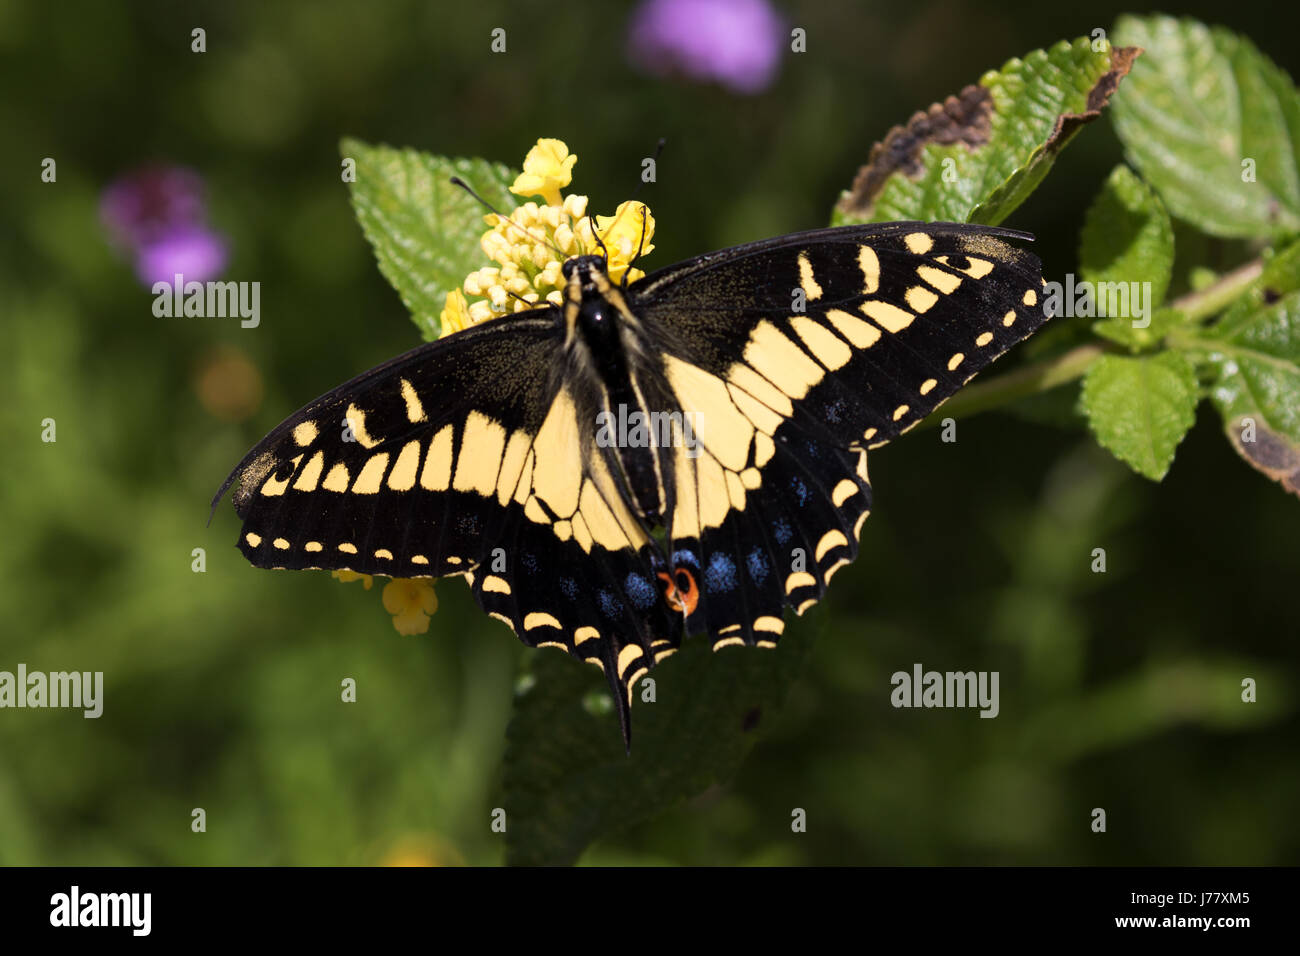 Anise Swallowtail Butterfly - Papilio zelicaon - May 2017, Los Angeles, California USA Stock Photo